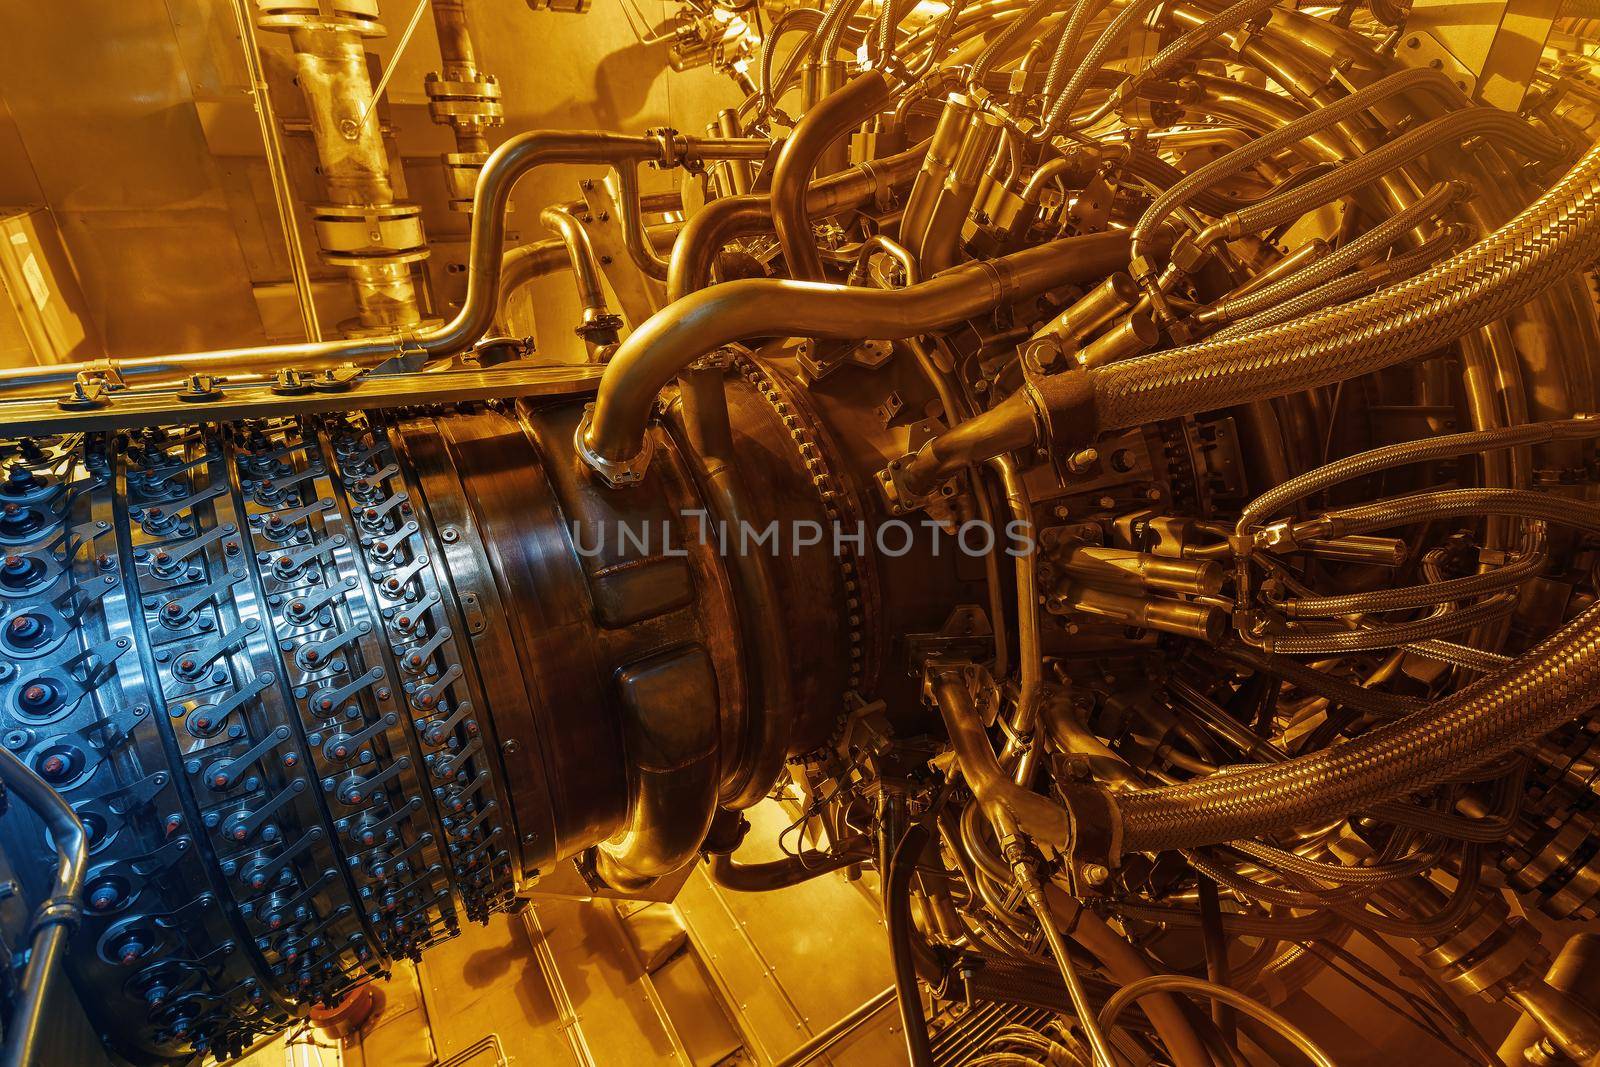 Gas turbine engine of feed gas compressor located inside pressurized enclosure, The gas turbine engine used in offshore oil and gas central processing platform. Technological ecological installation